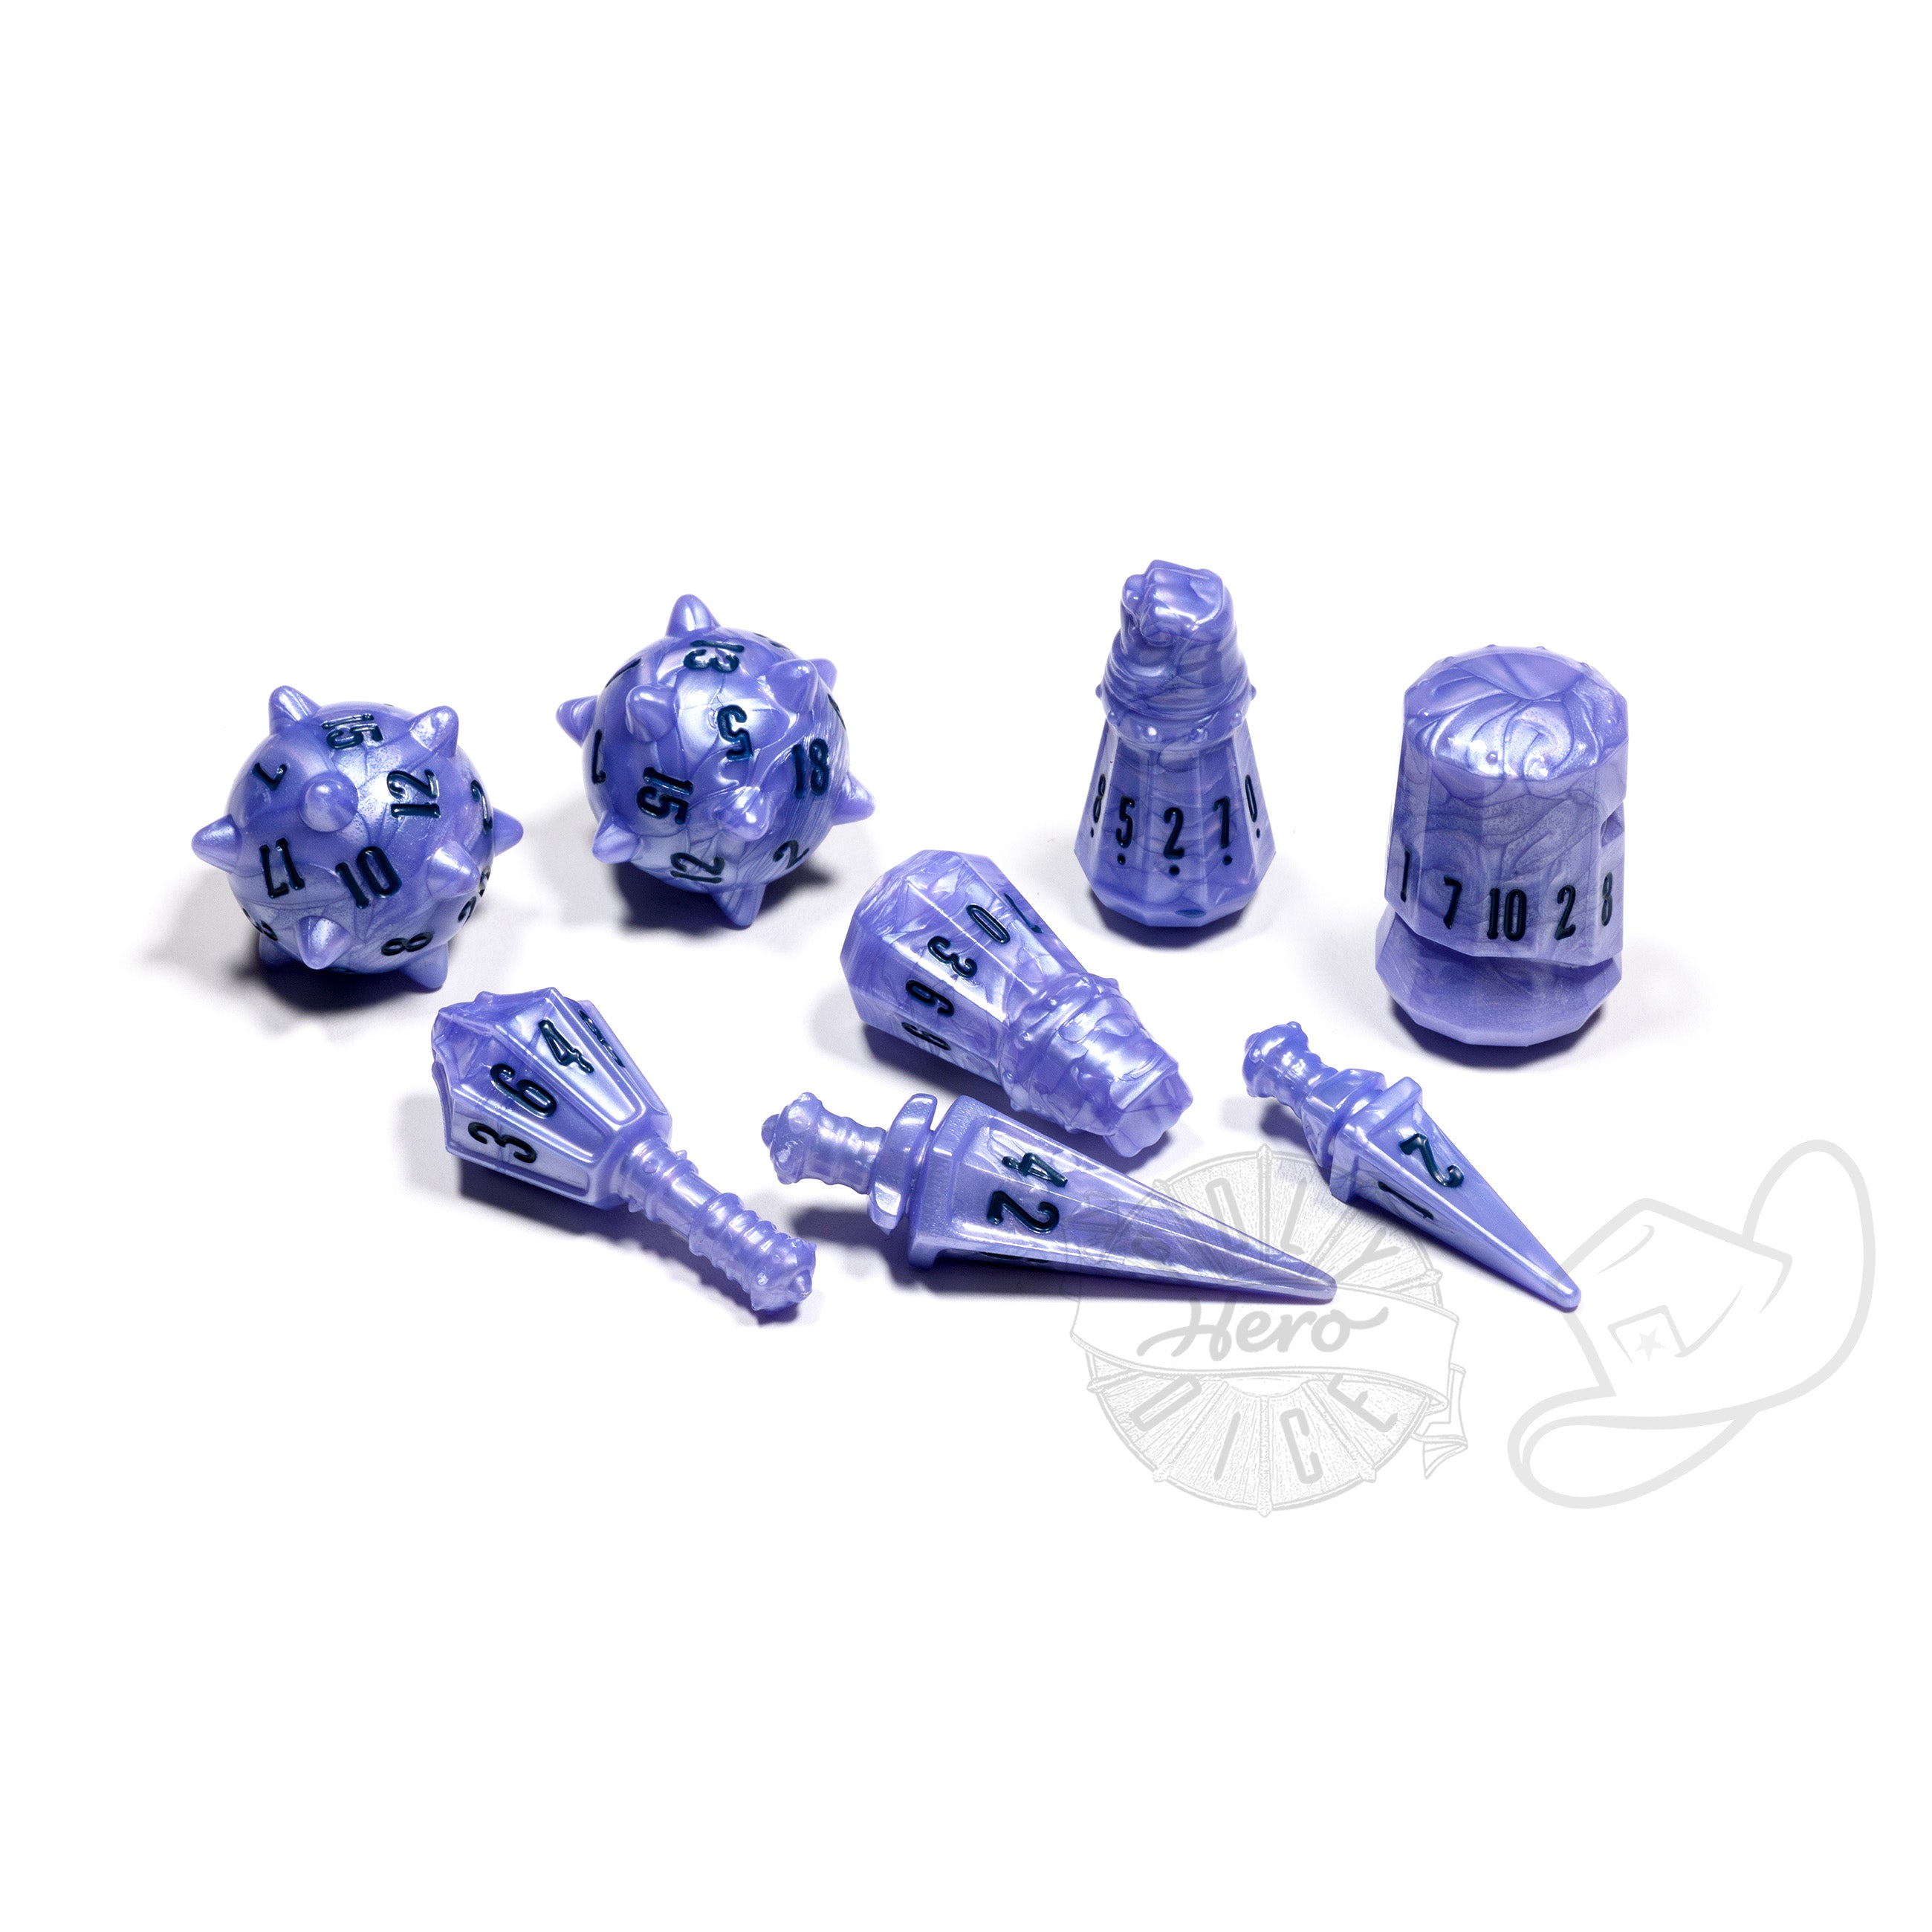 Products PolyHero Warrior 8 Dice roleplaying Set ghost knight